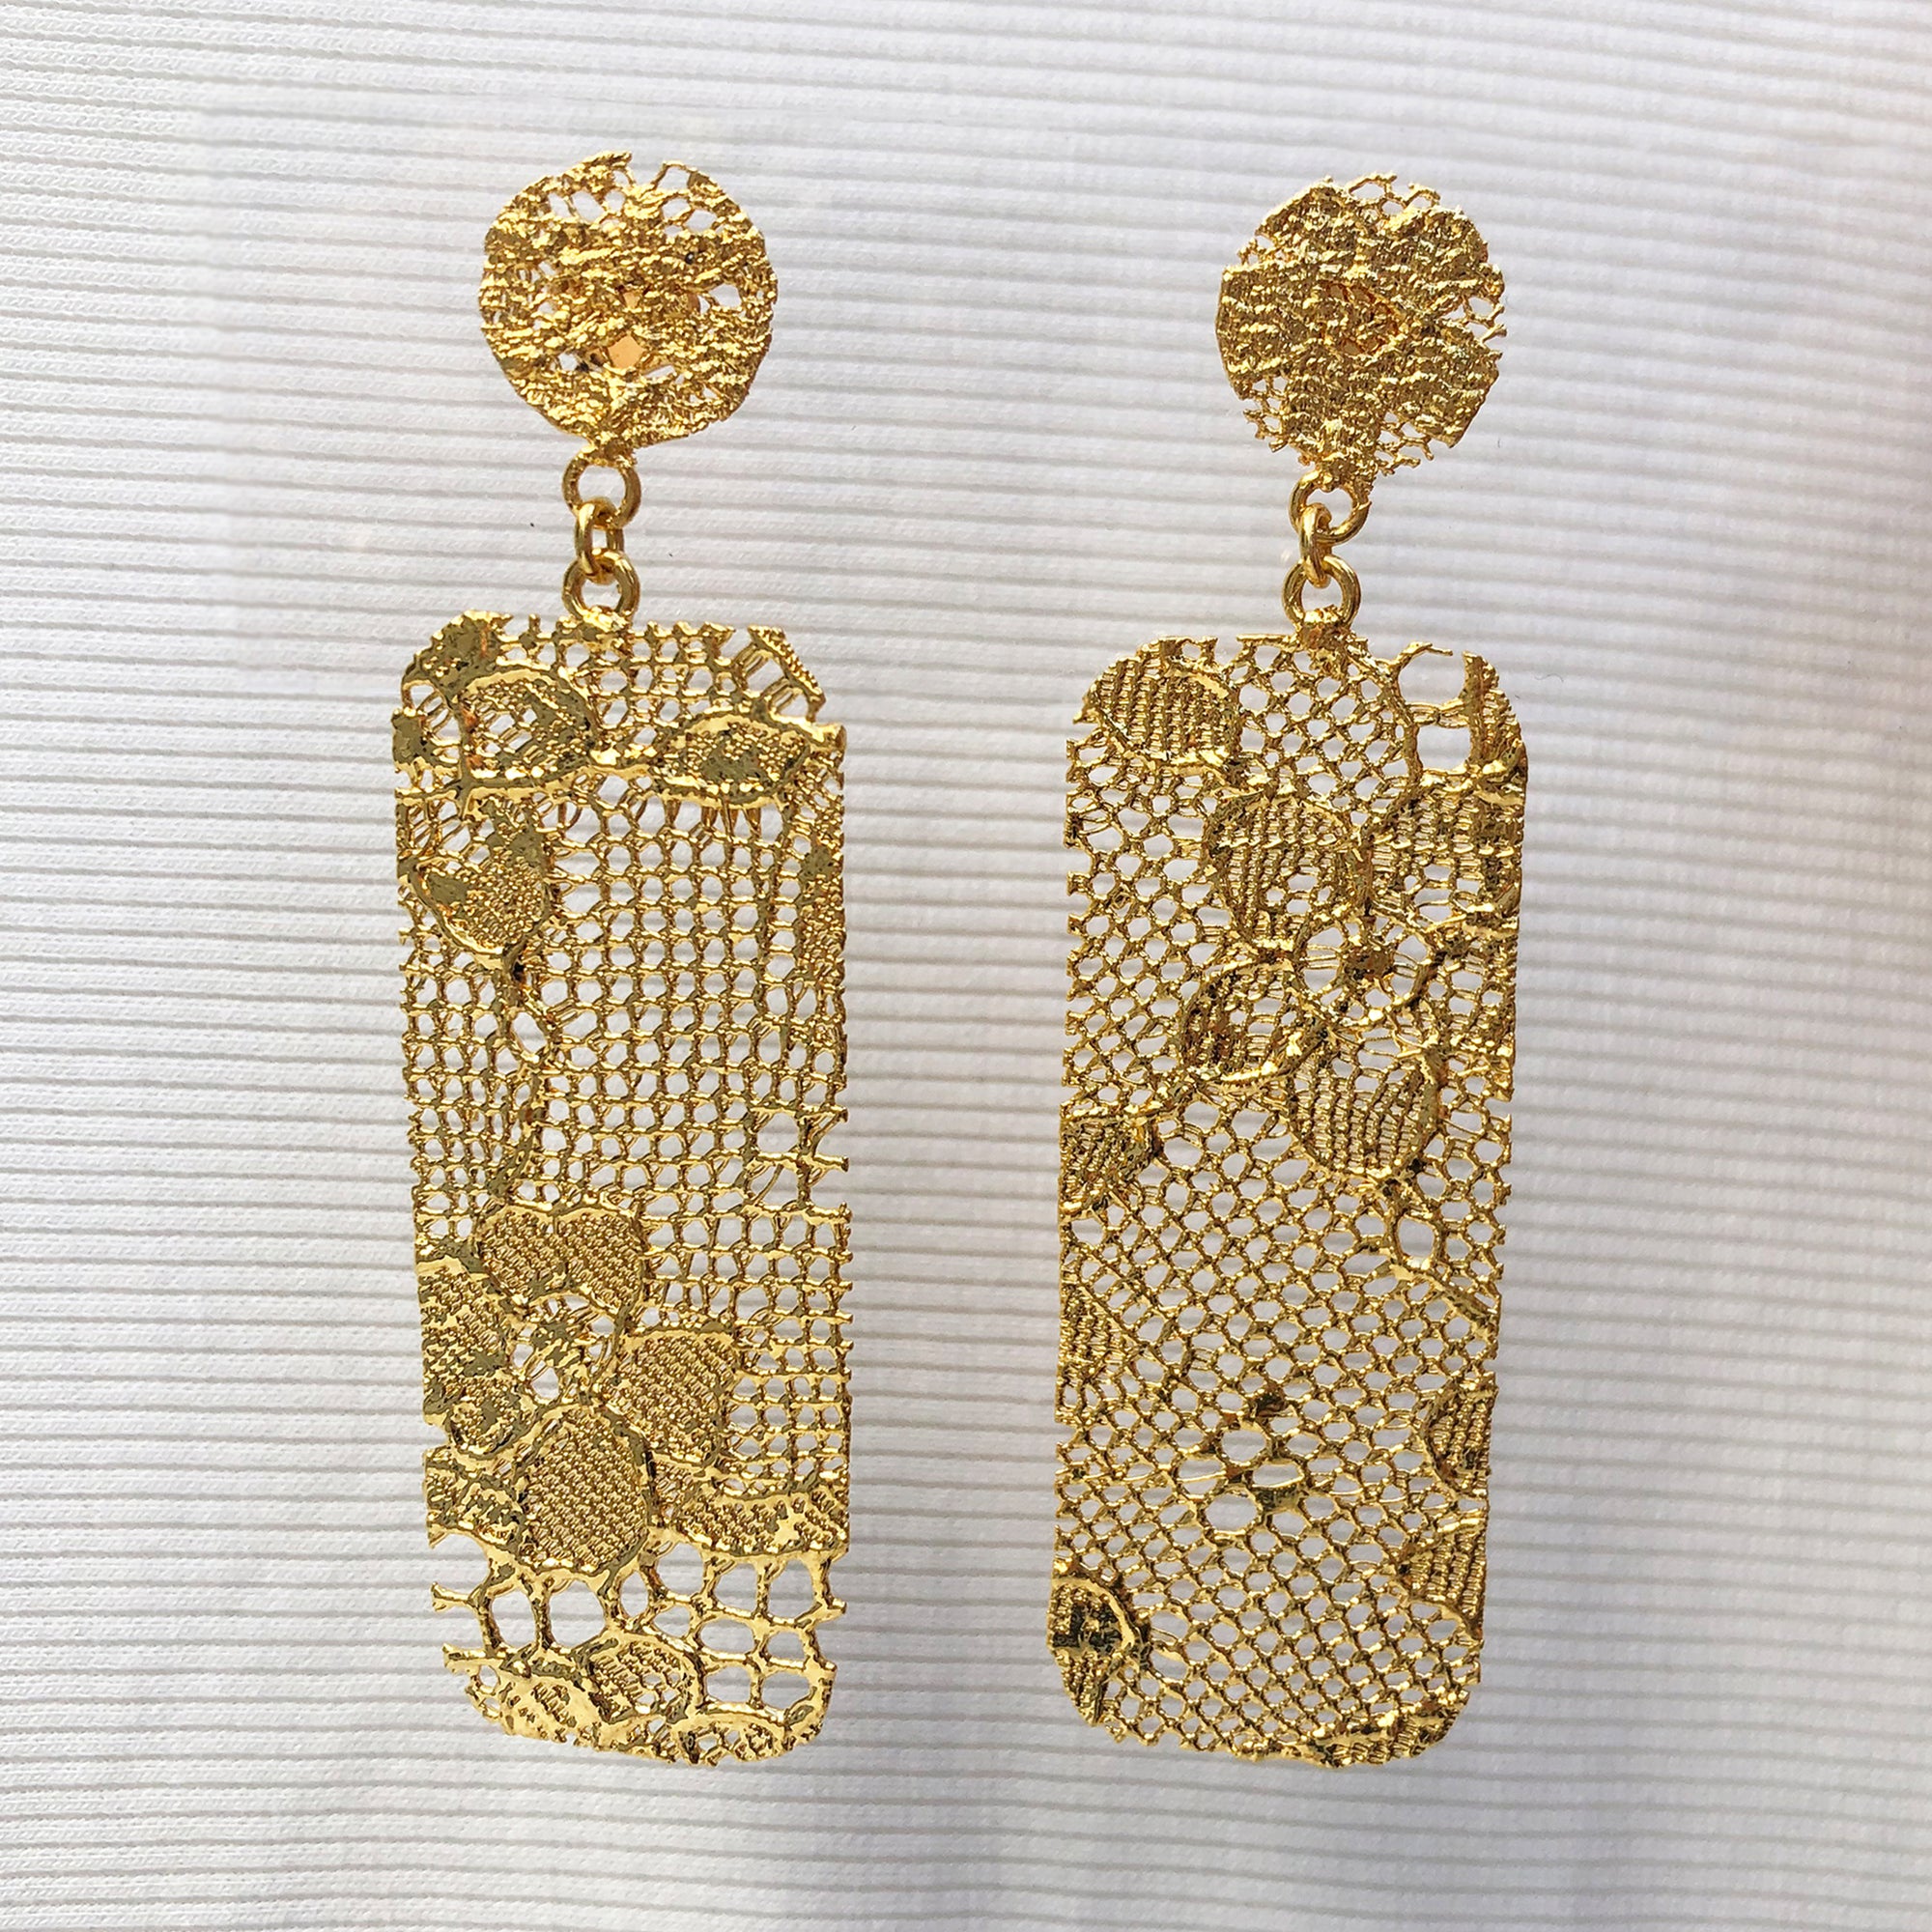 Sophisticated rectangular earrings in 24k gold made from Chantilly lace. Unique 13th anniversary gift.